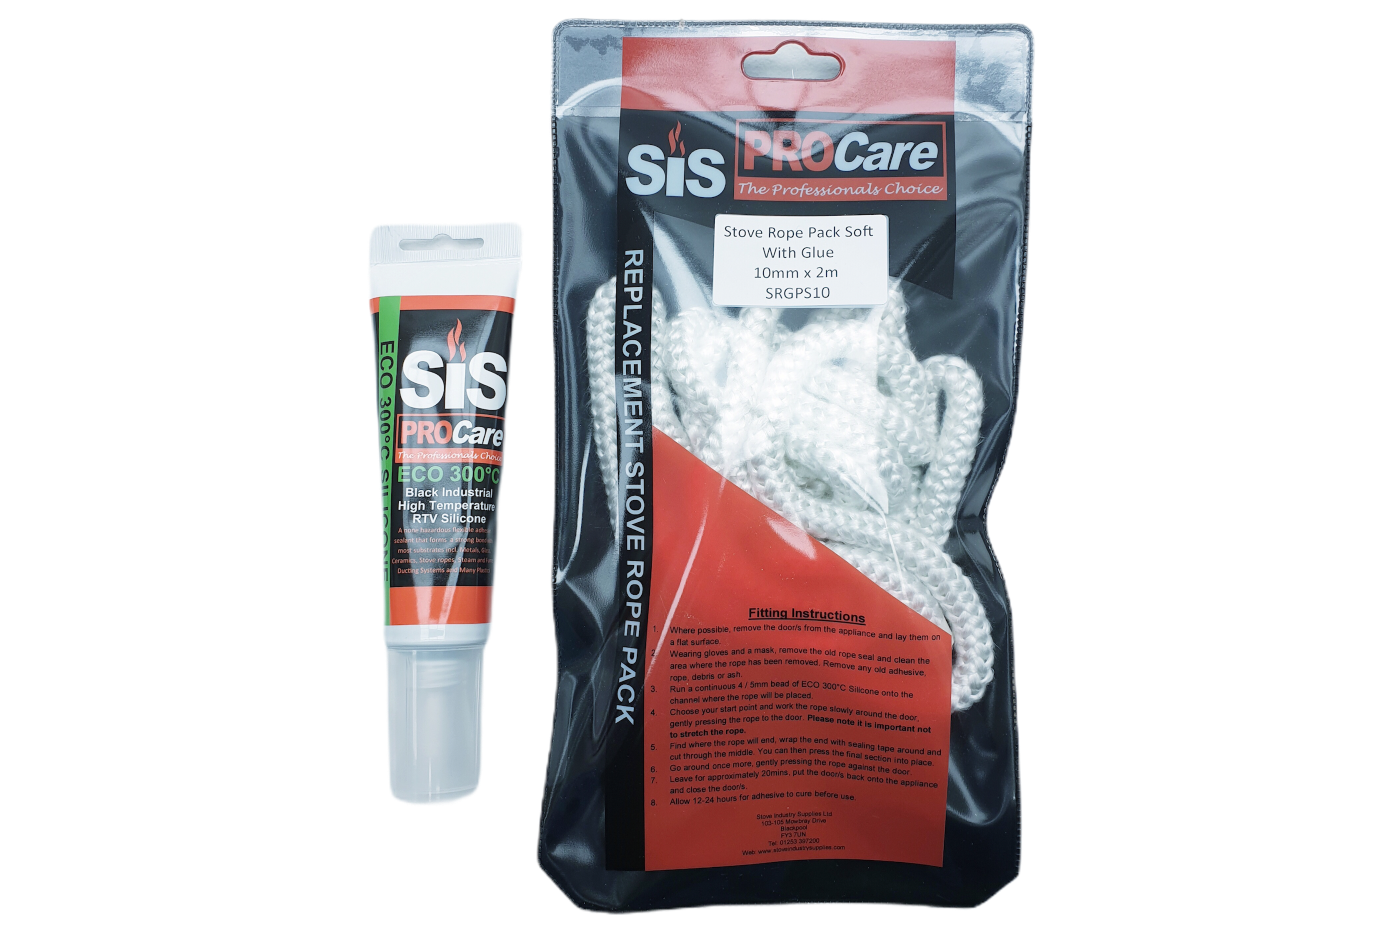 SiS Procare White 10 milimetre x 2 metre Soft Stove Rope & 80 millilitre Rope Glue Pack - product code SRGPS10